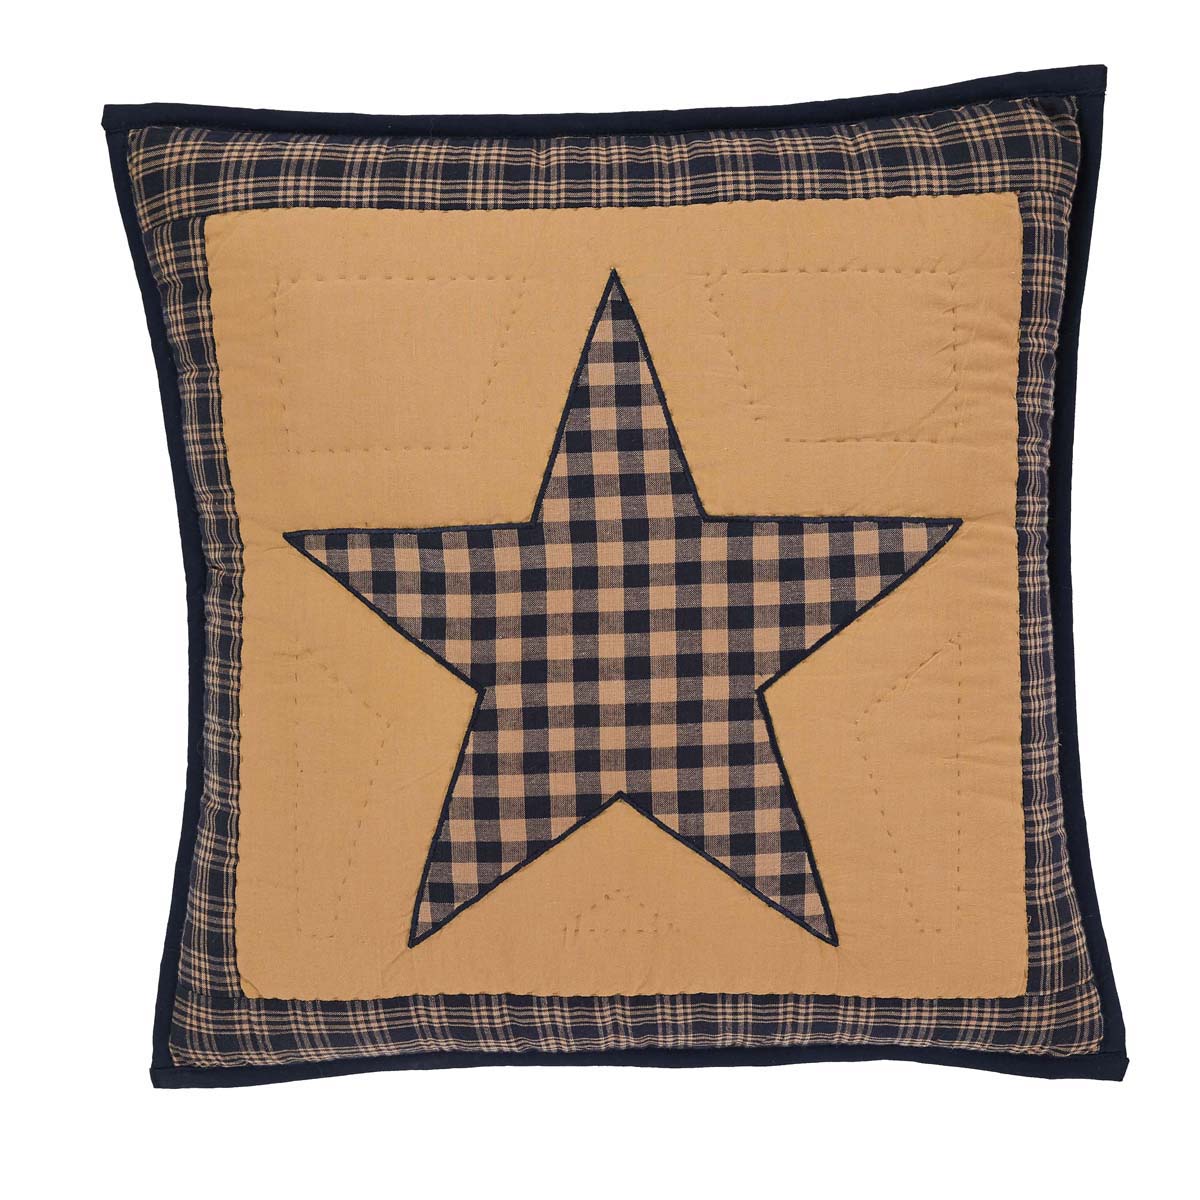 32945-Teton-Star-Quilted-Pillow-16x16-image-4